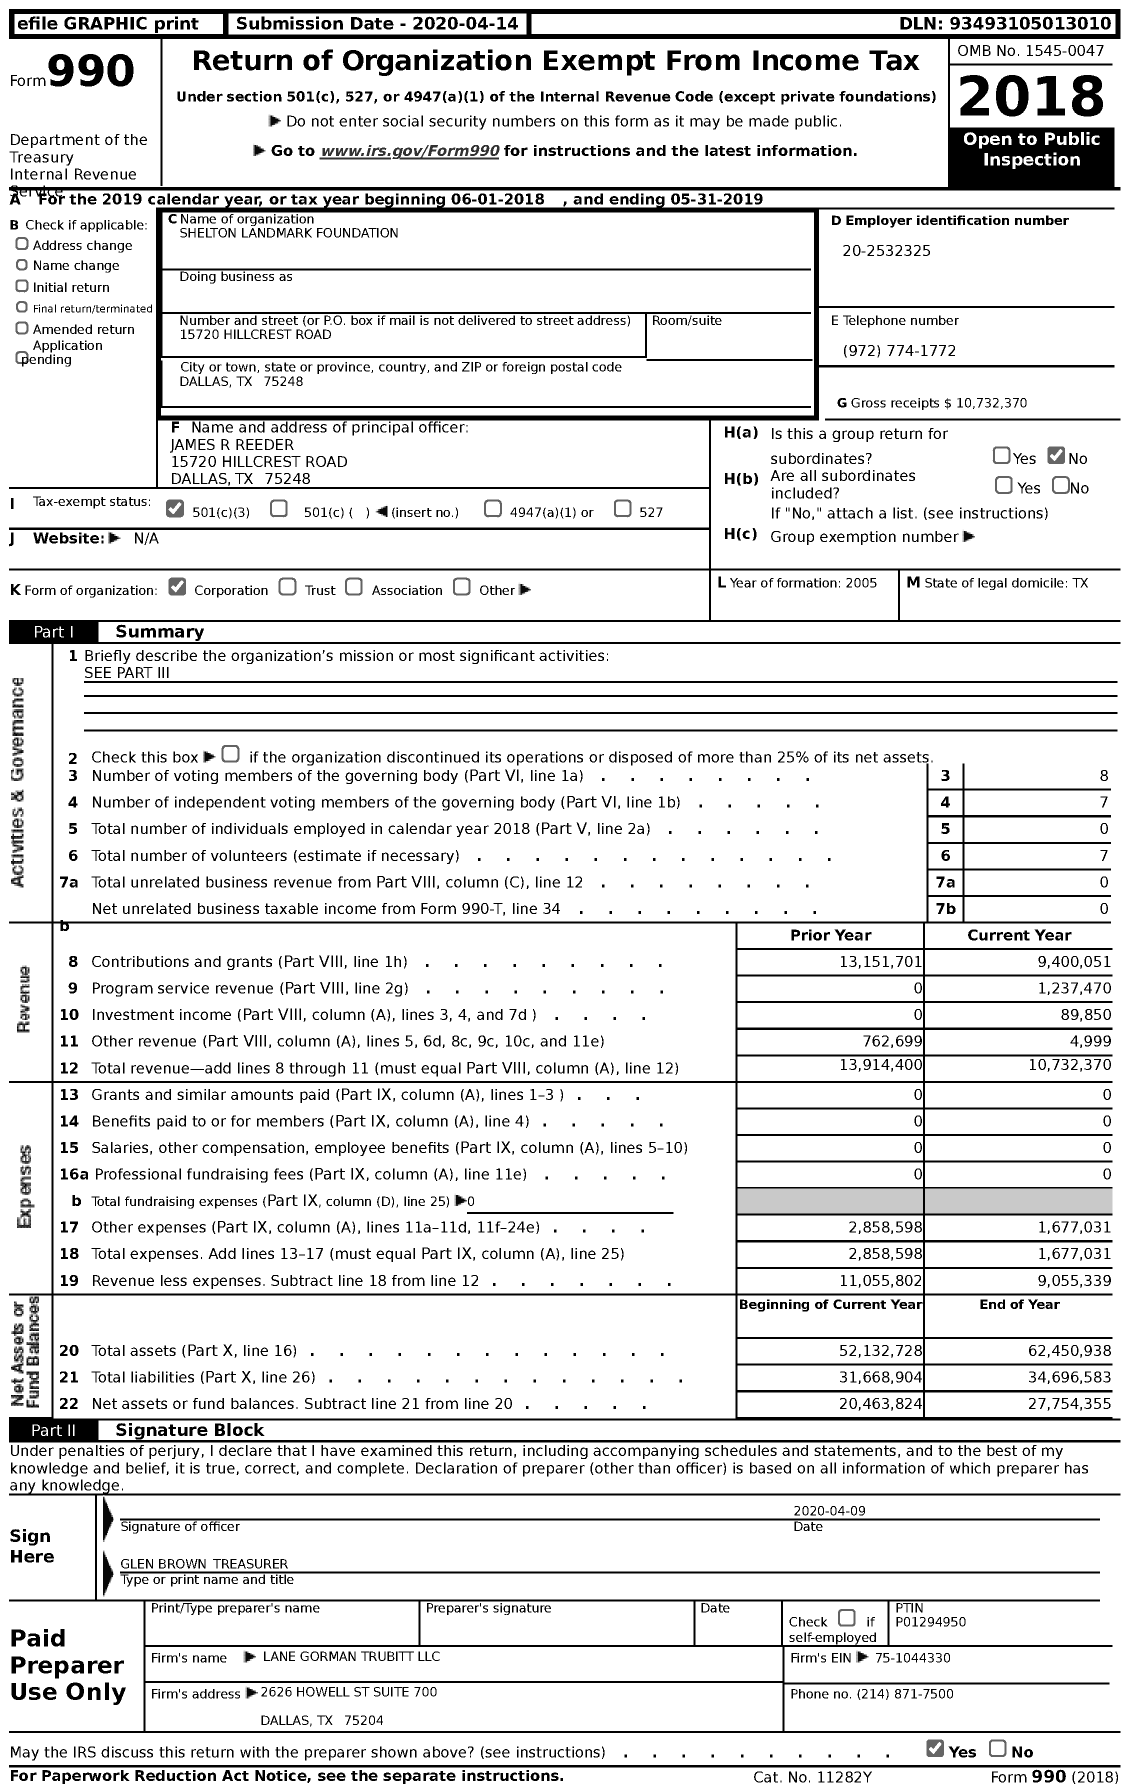 Image of first page of 2018 Form 990 for Shelton Landmark Foundation